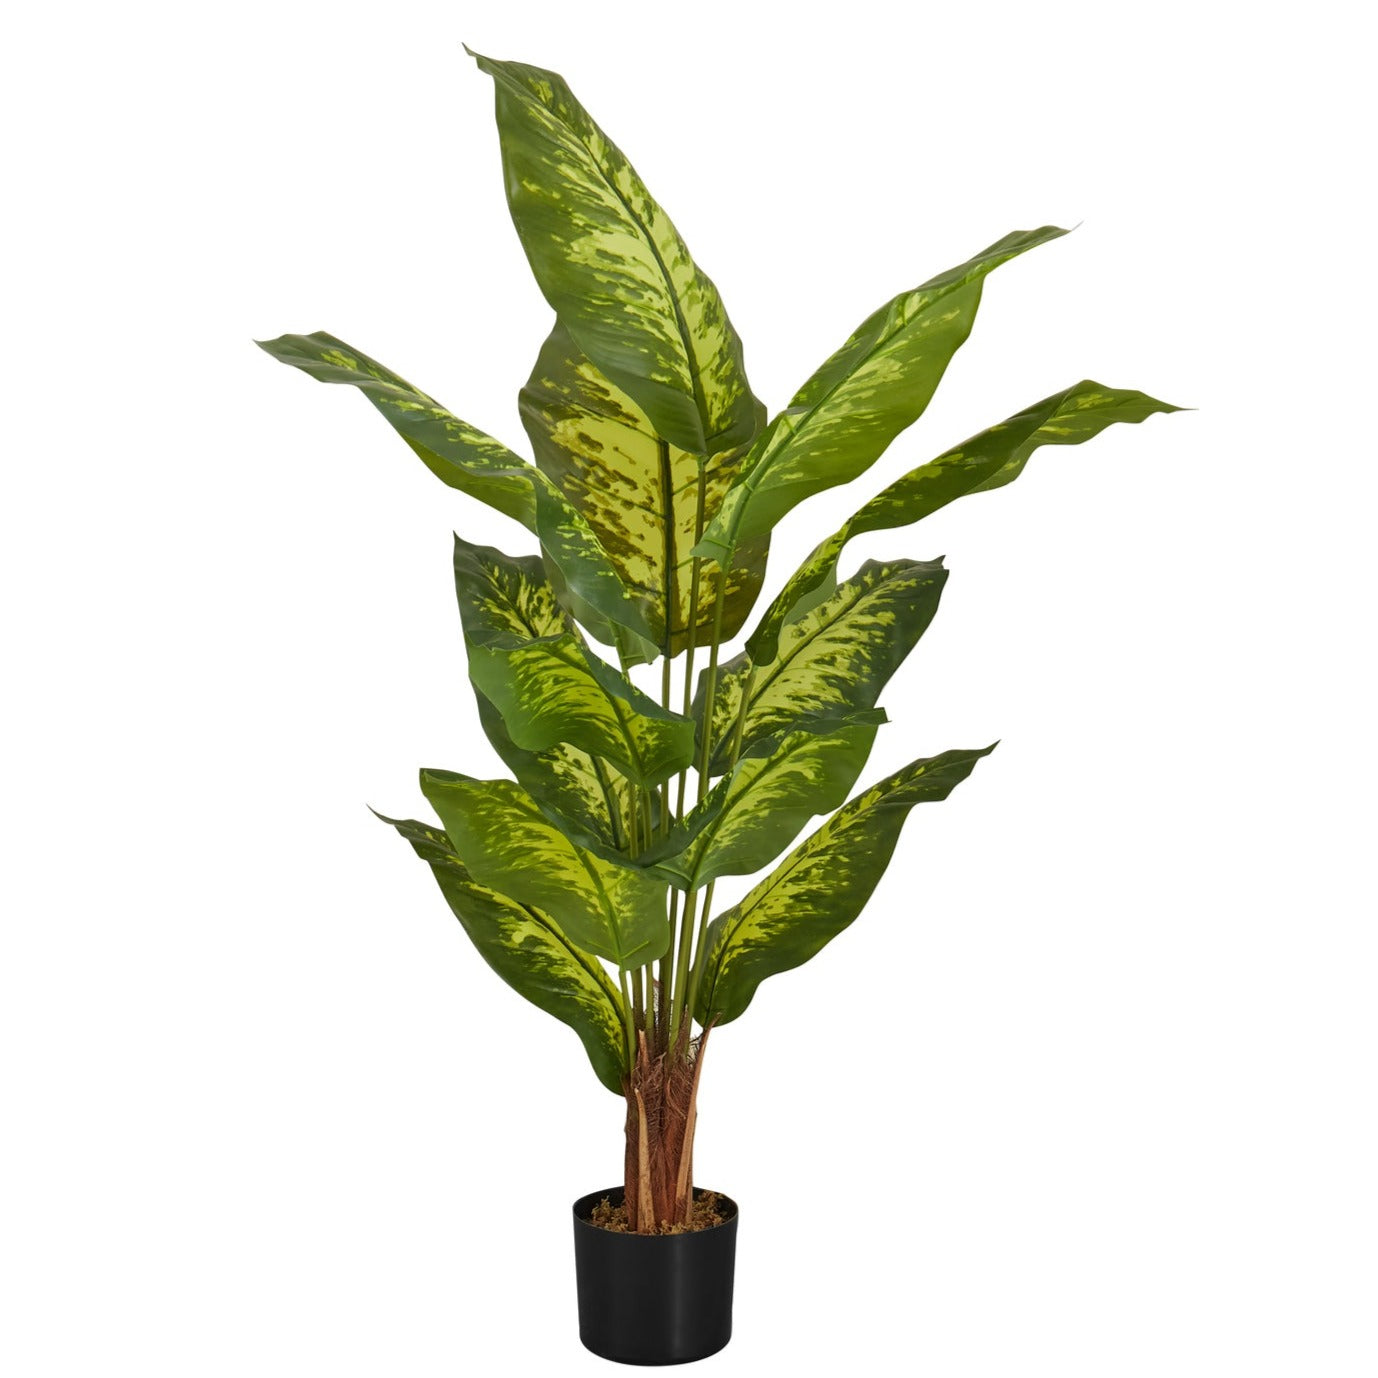 ARTIFICIAL PLANT - 47"H / INDOOR EVERGREEN IN A 5" POT